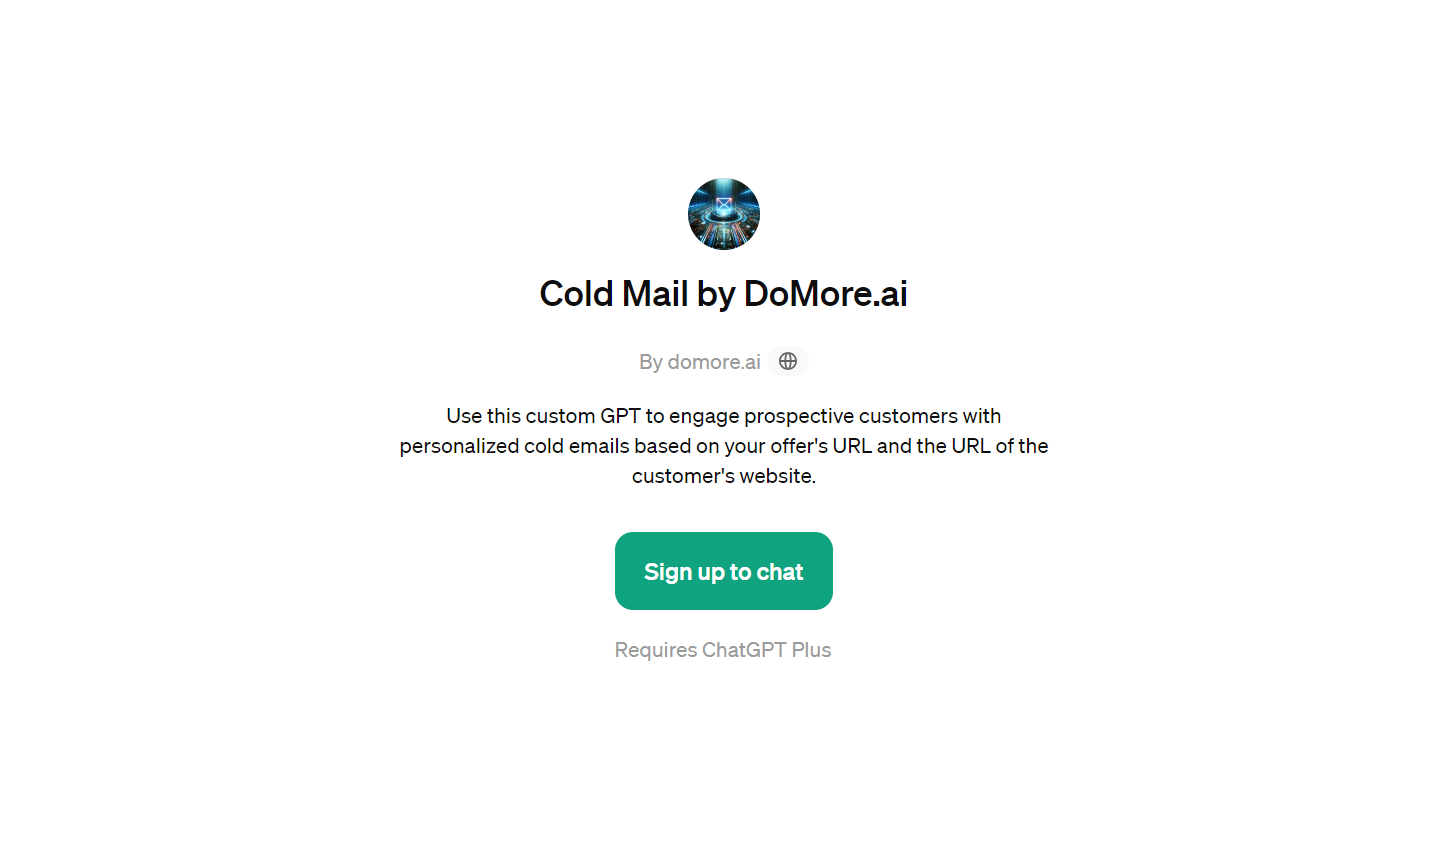 Cold Mail - Reach Out to Prospective Customers